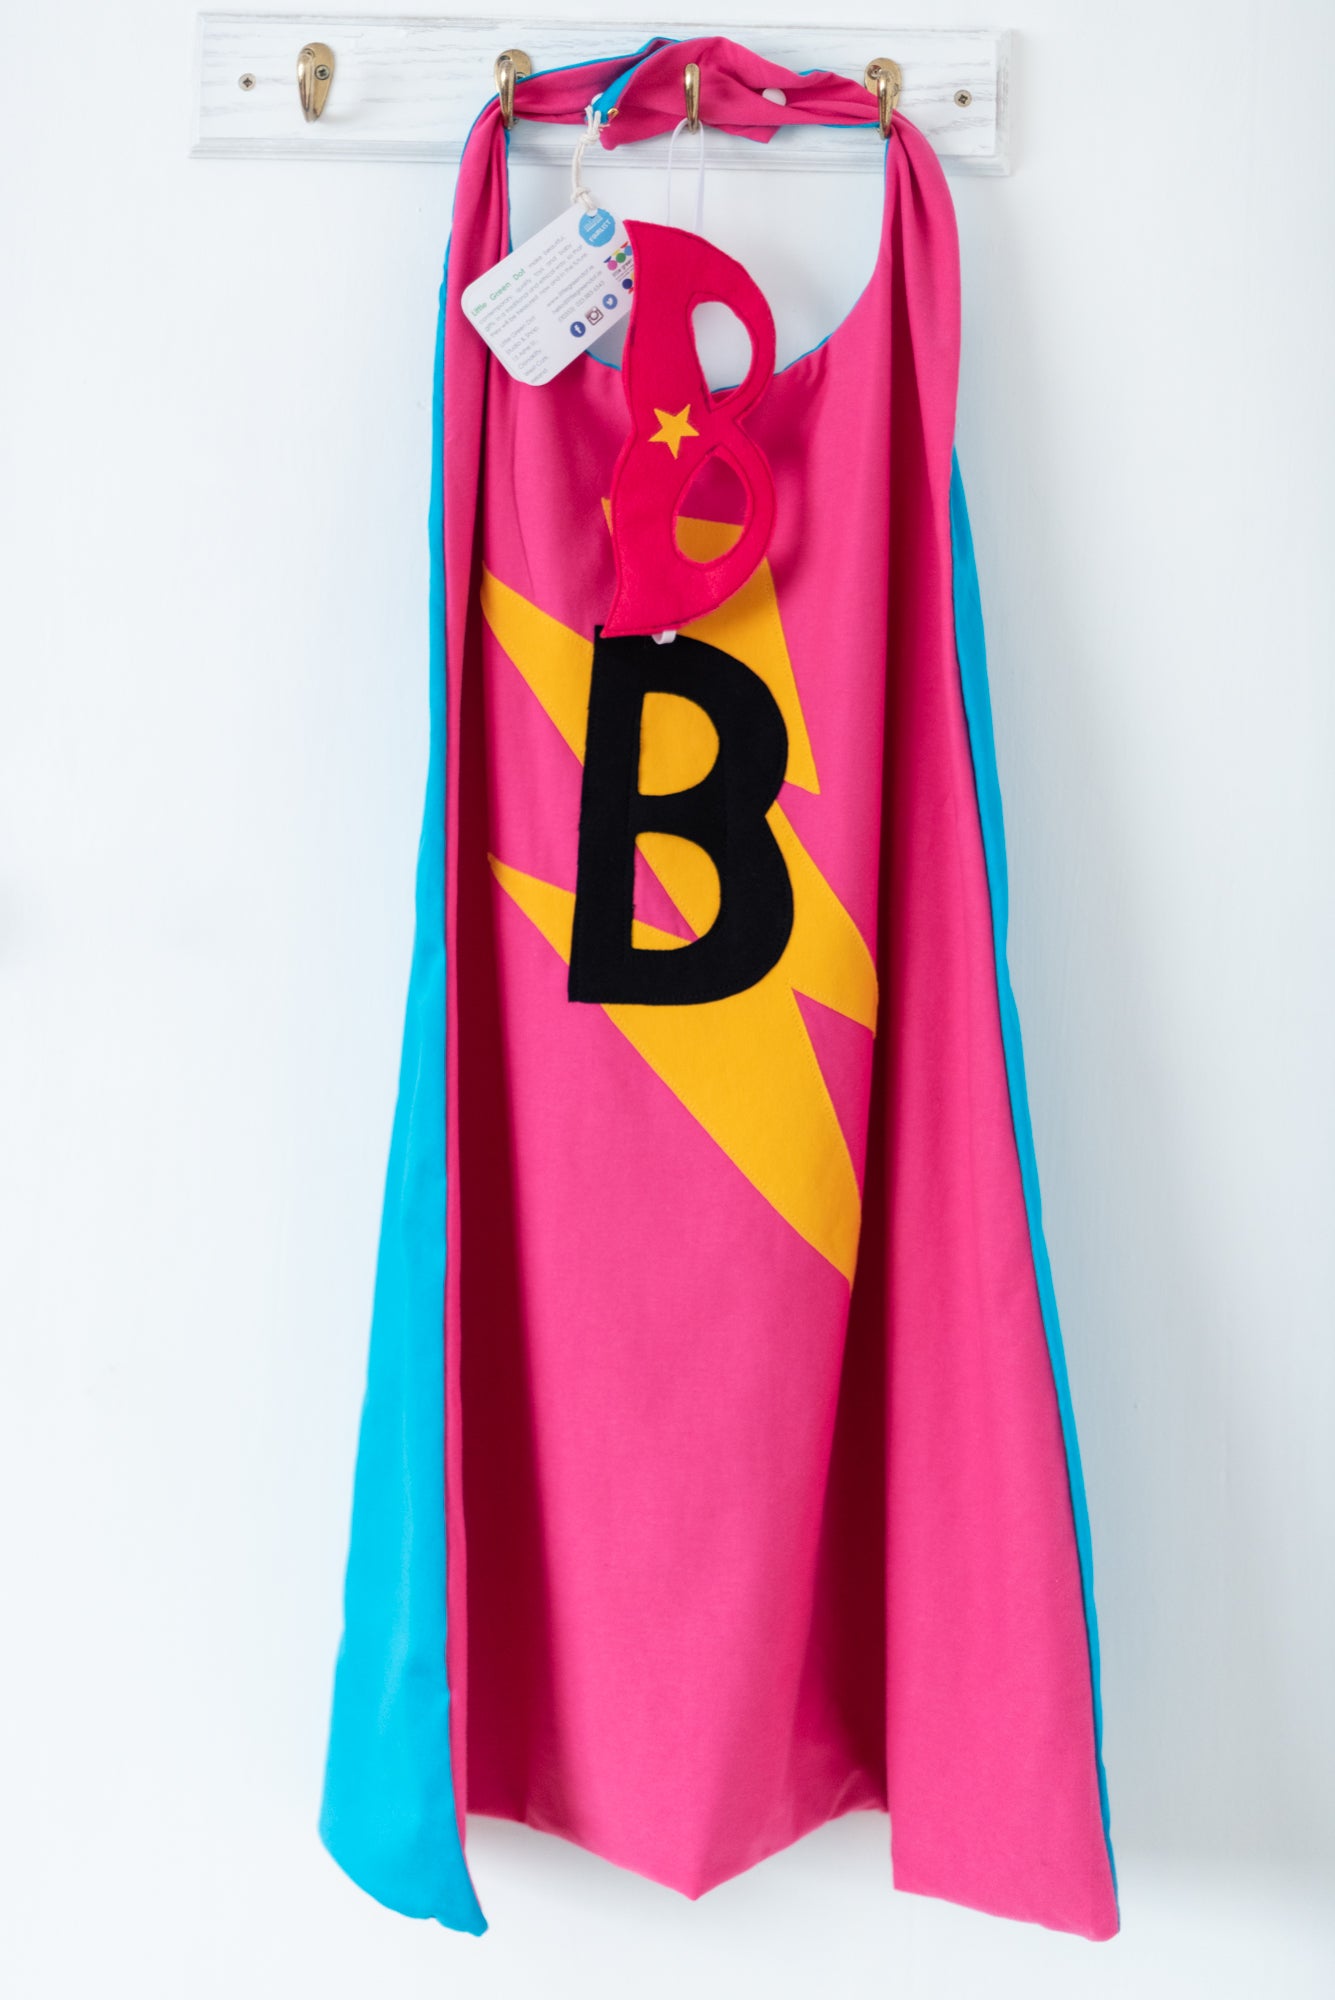 Hot Pink and Green Superhero Cape - MADE TO ORDER